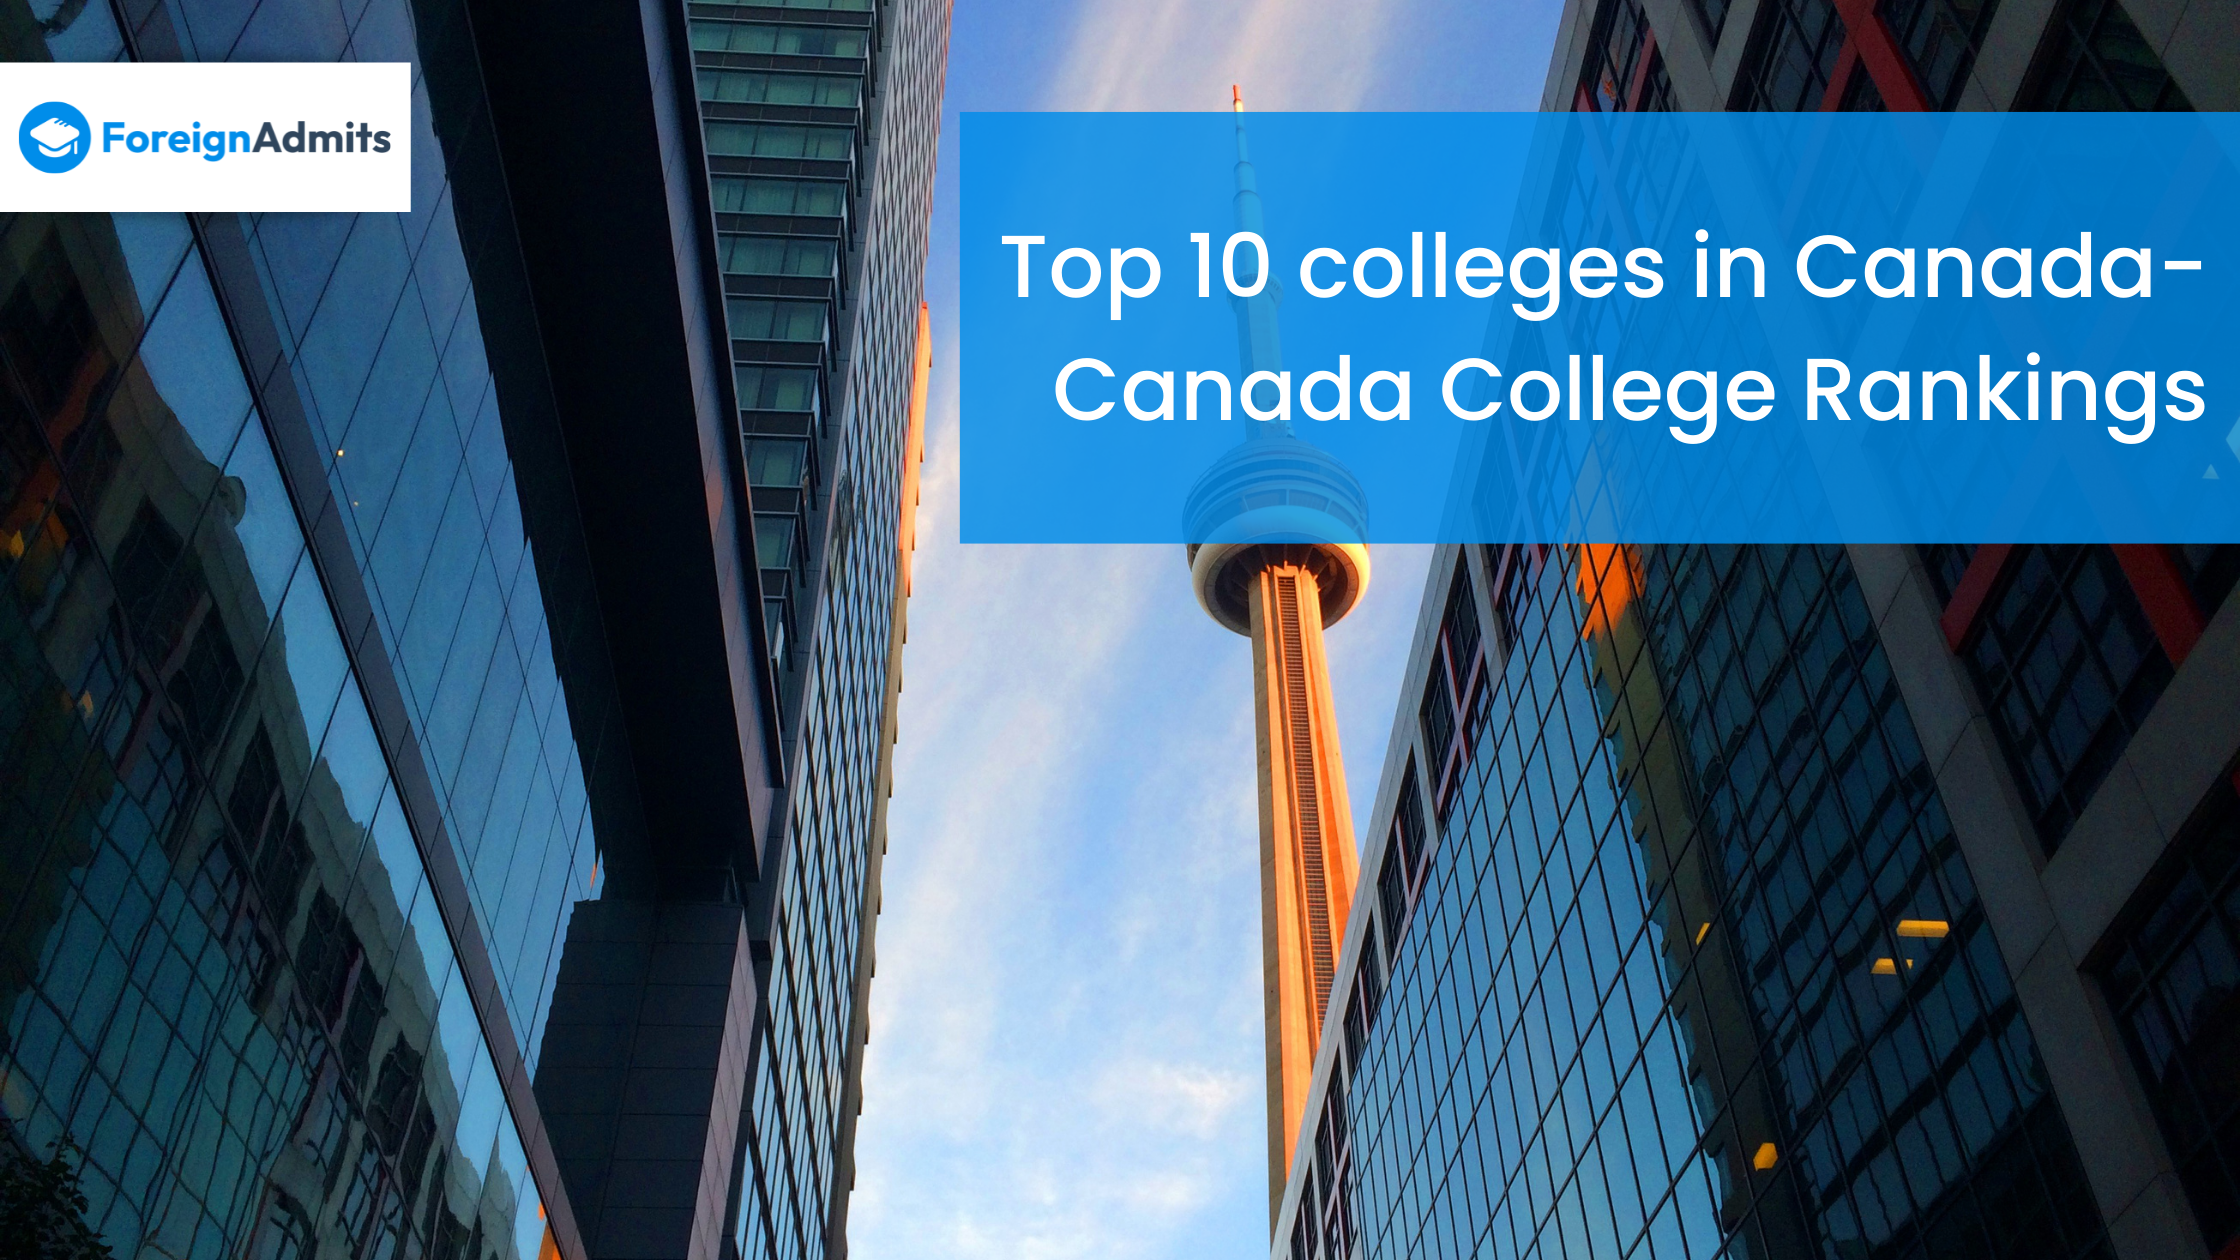 Top 10 colleges in Canada- Canada College Rankings